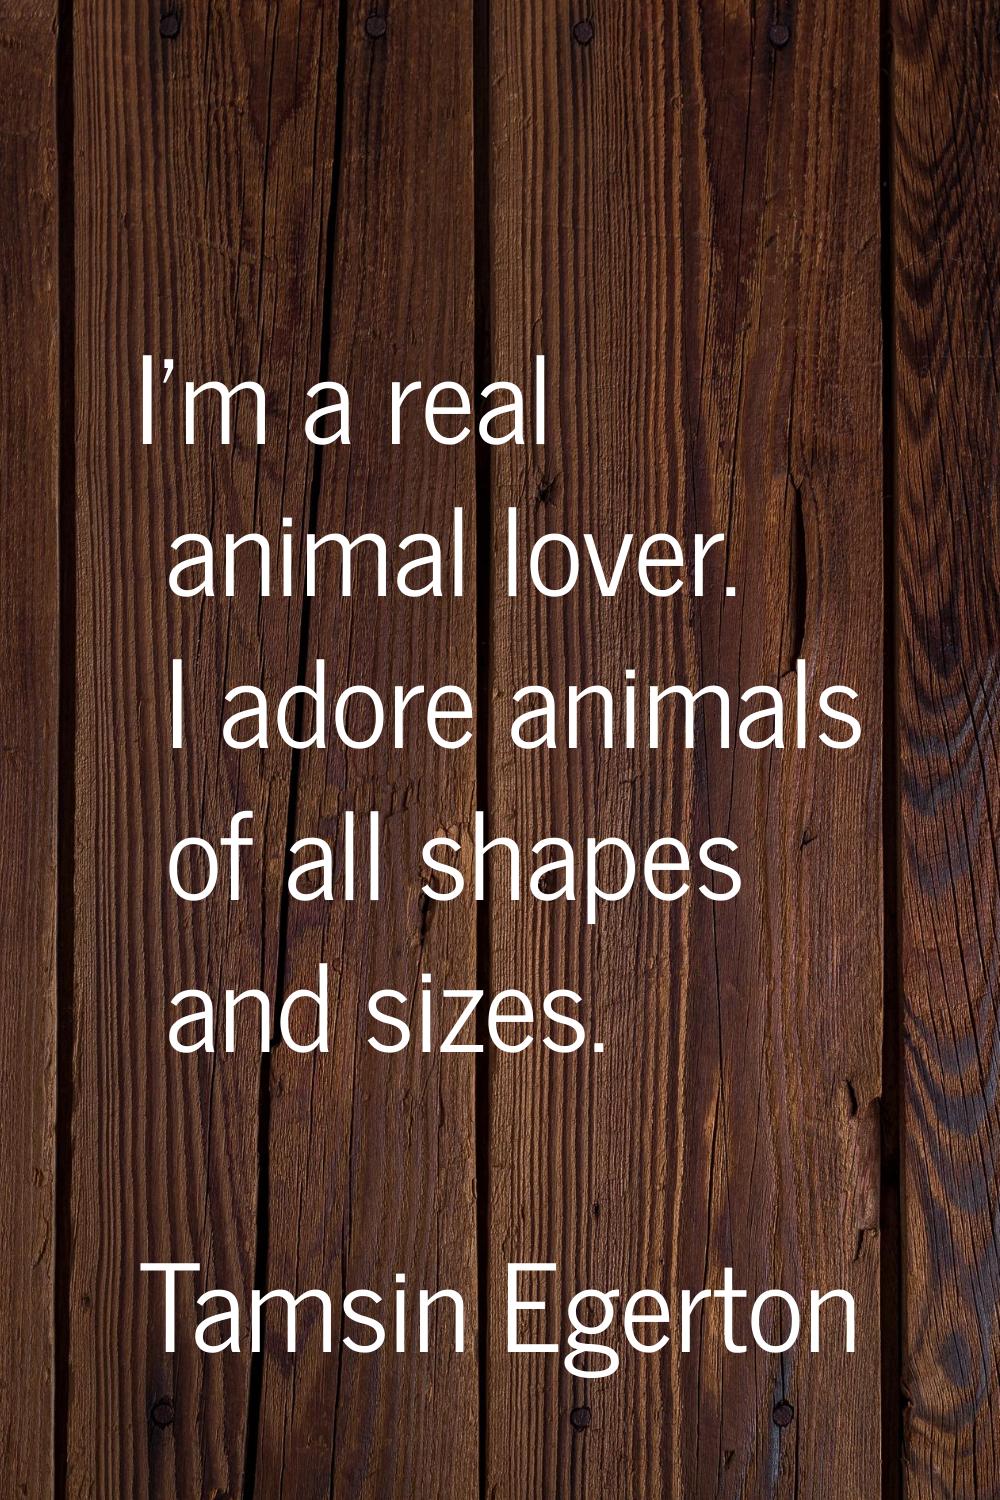 I'm a real animal lover. I adore animals of all shapes and sizes.